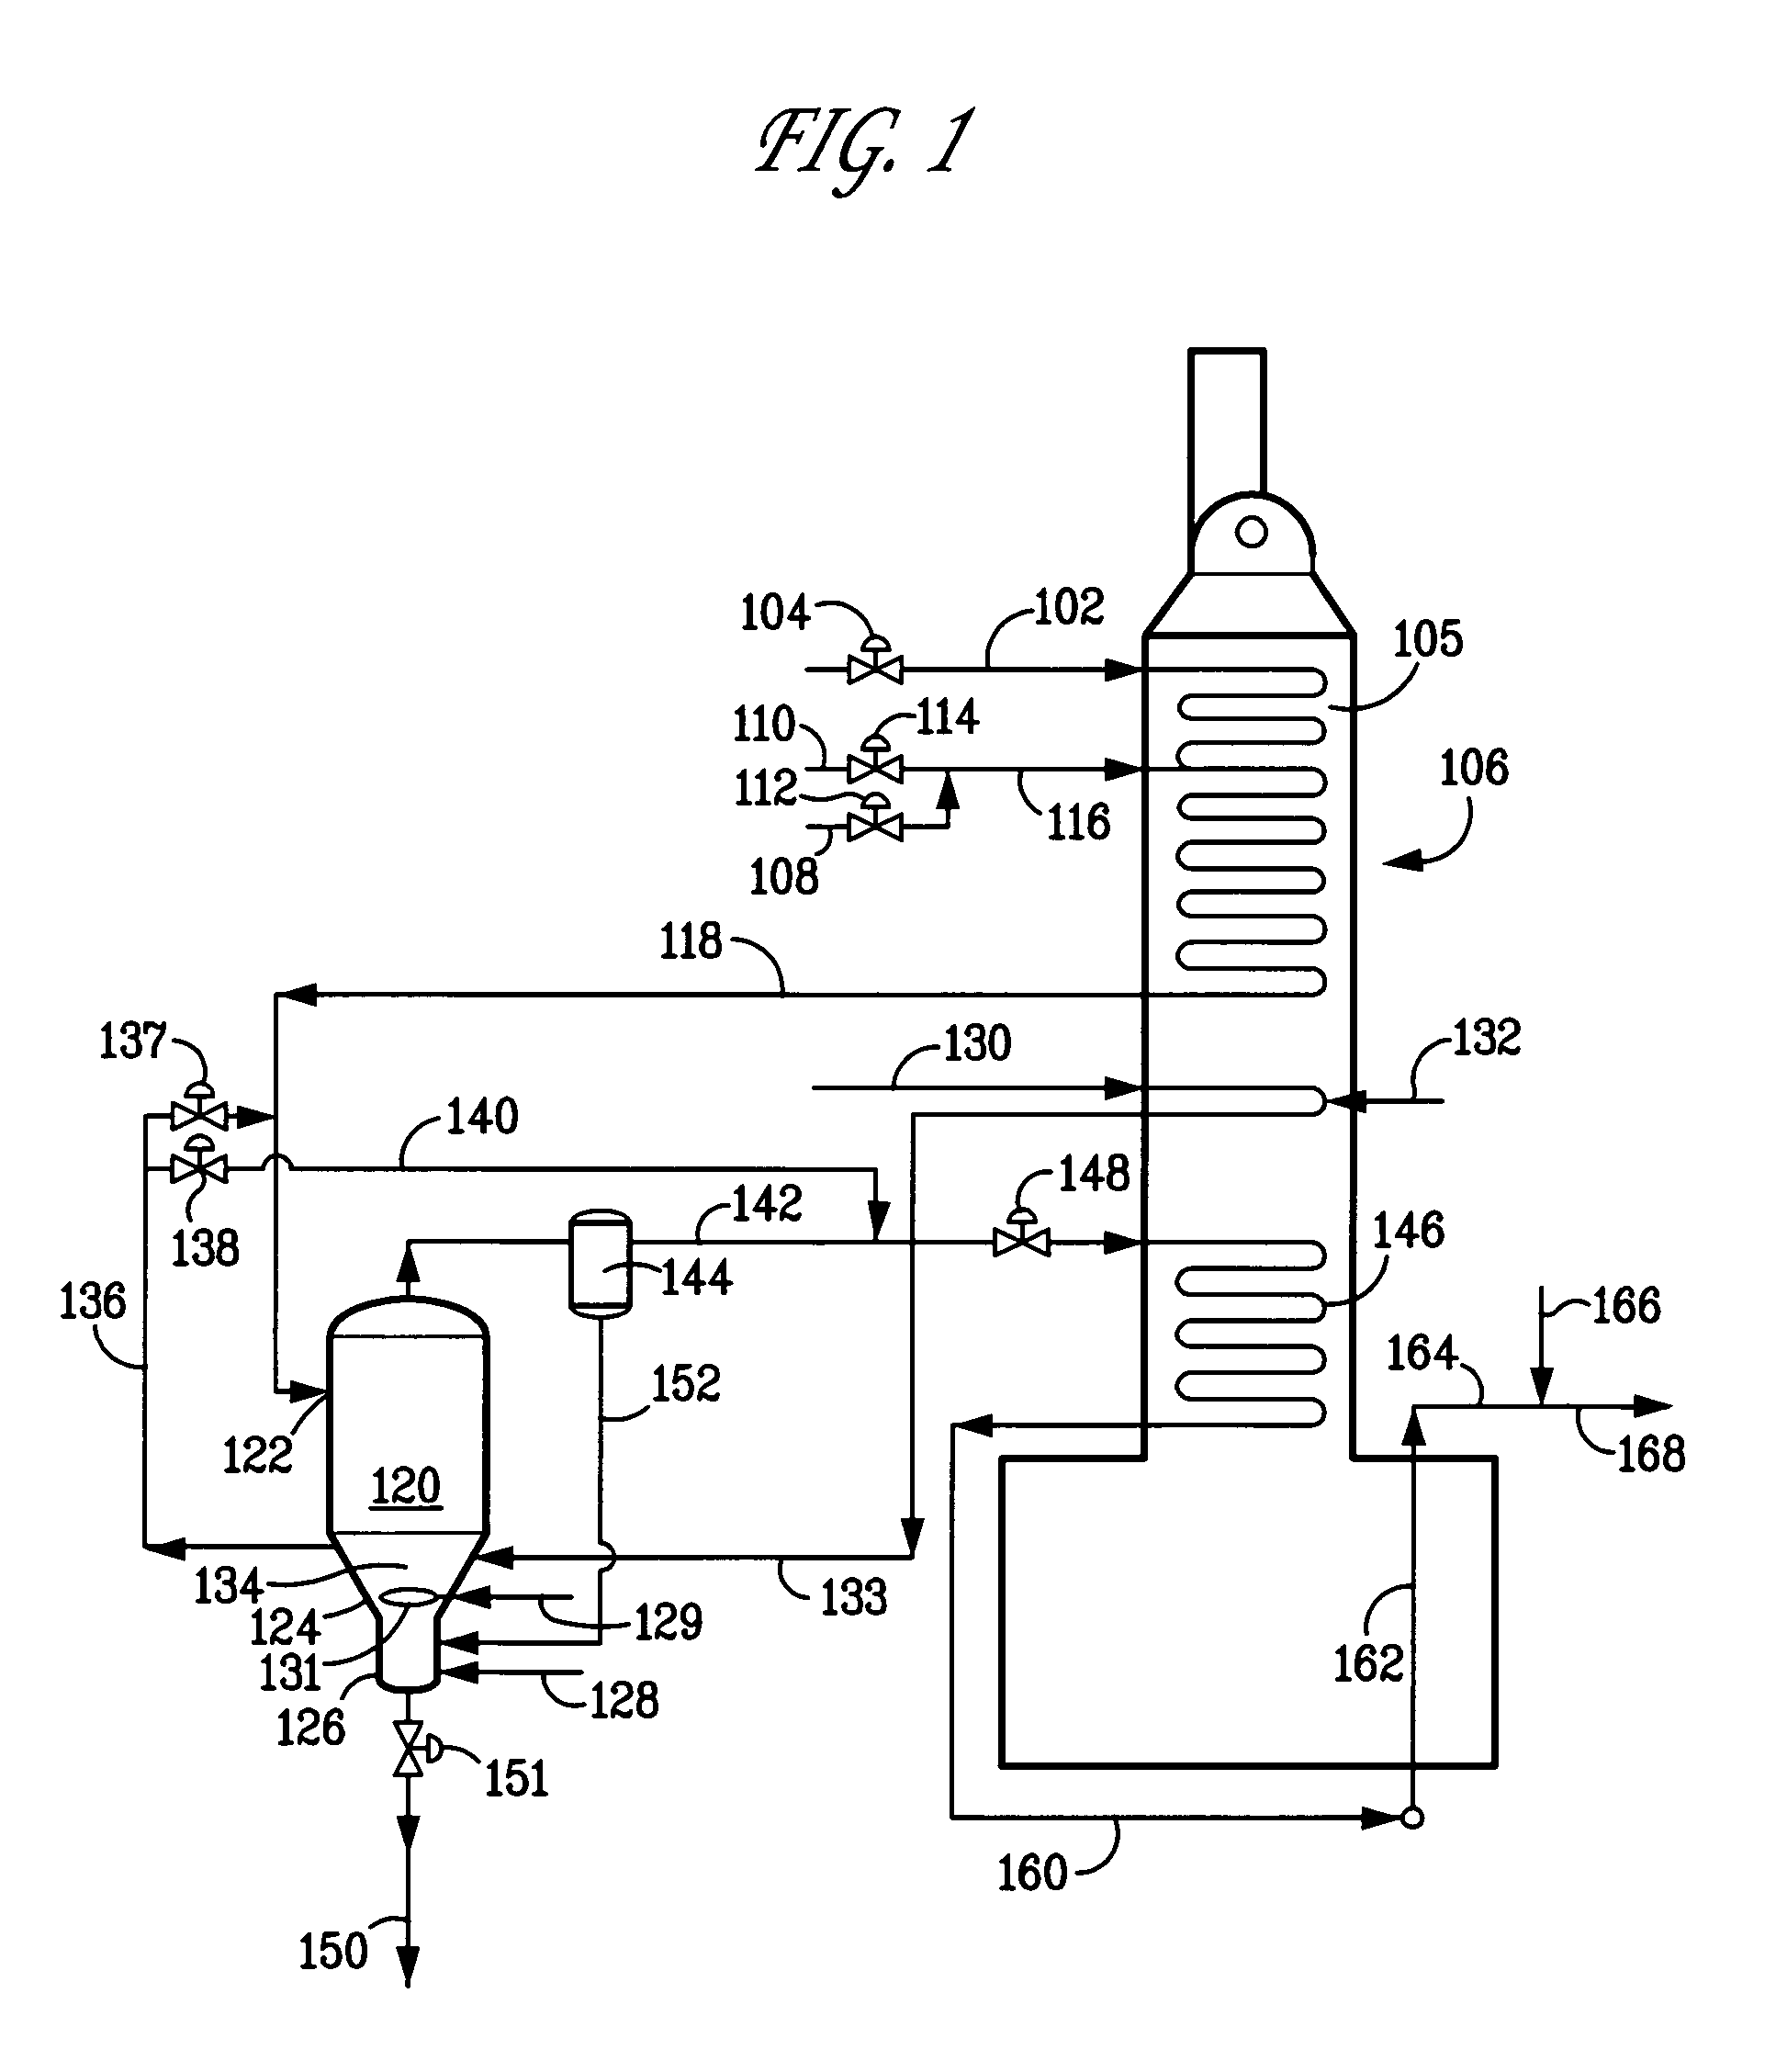 Process and apparatus for cracking hydrocarbon feedstock containing resid to improve vapor yield from vapor/liquid separation